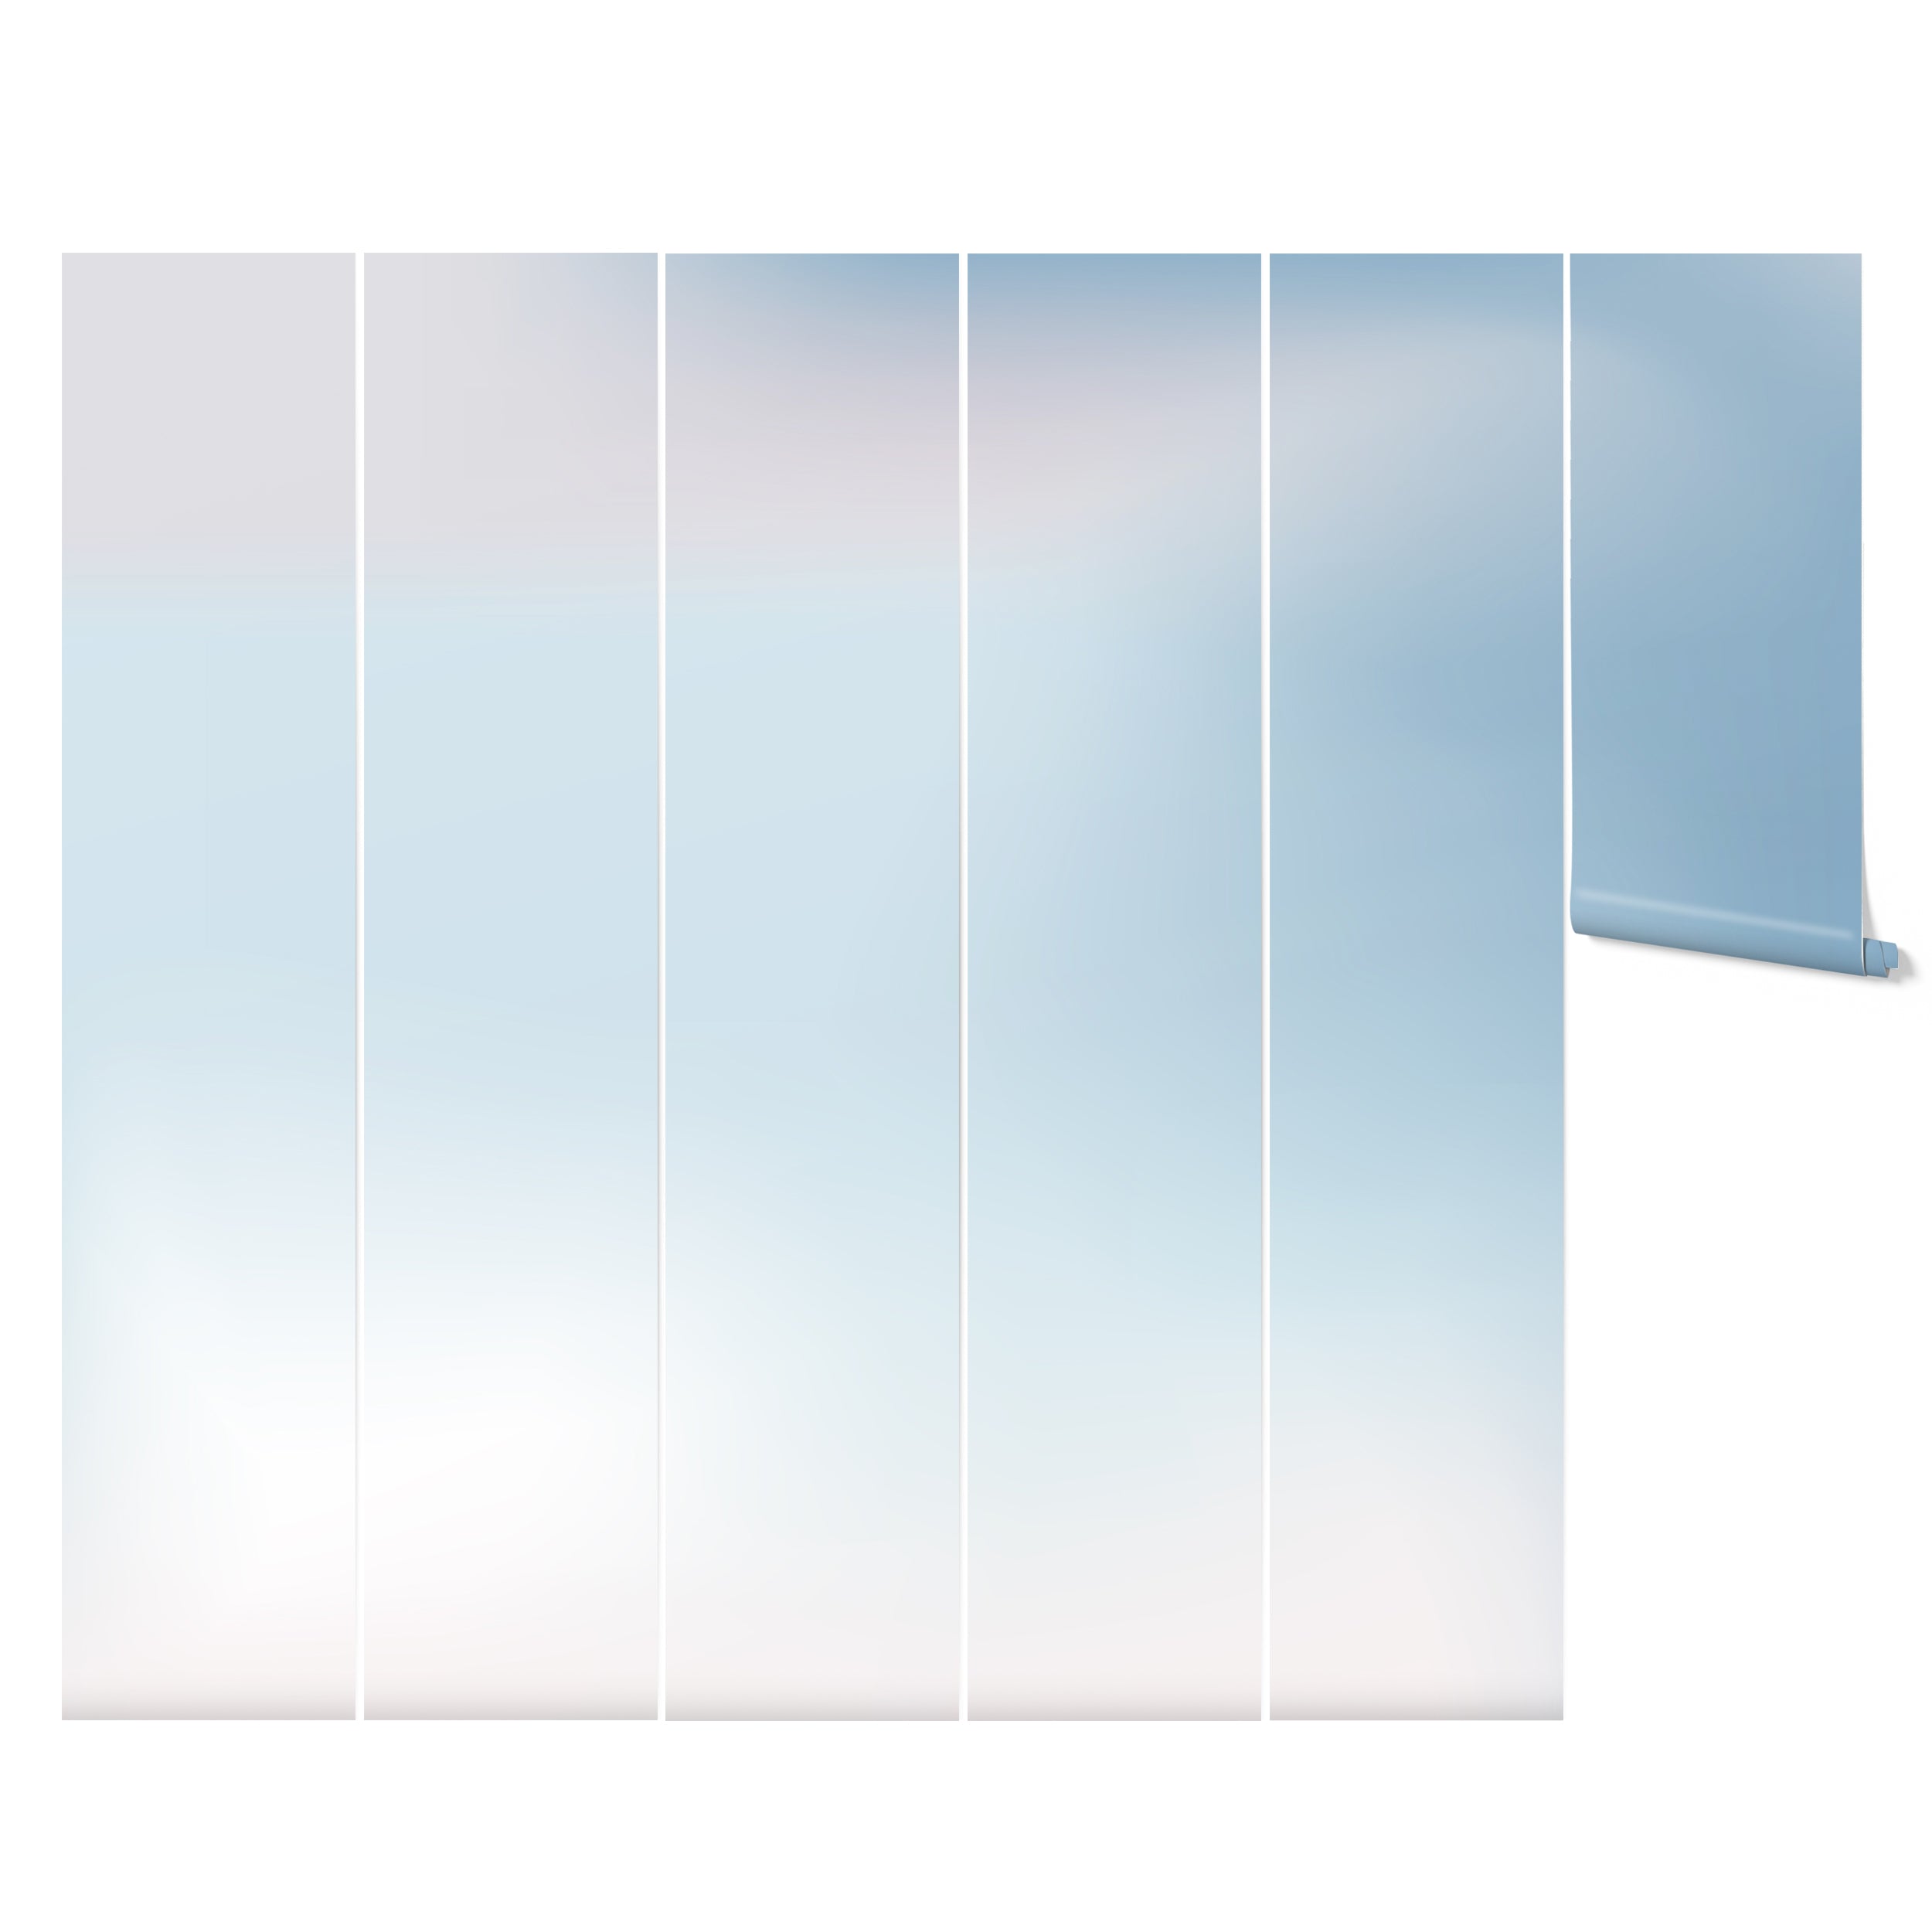 The Sky Soft Gradient Wallpaper displayed in six vertical panels. The wallpaper starts with a light blue color at the top, gradually transitioning to a soft white towards the bottom, showcasing the full gradient effect.